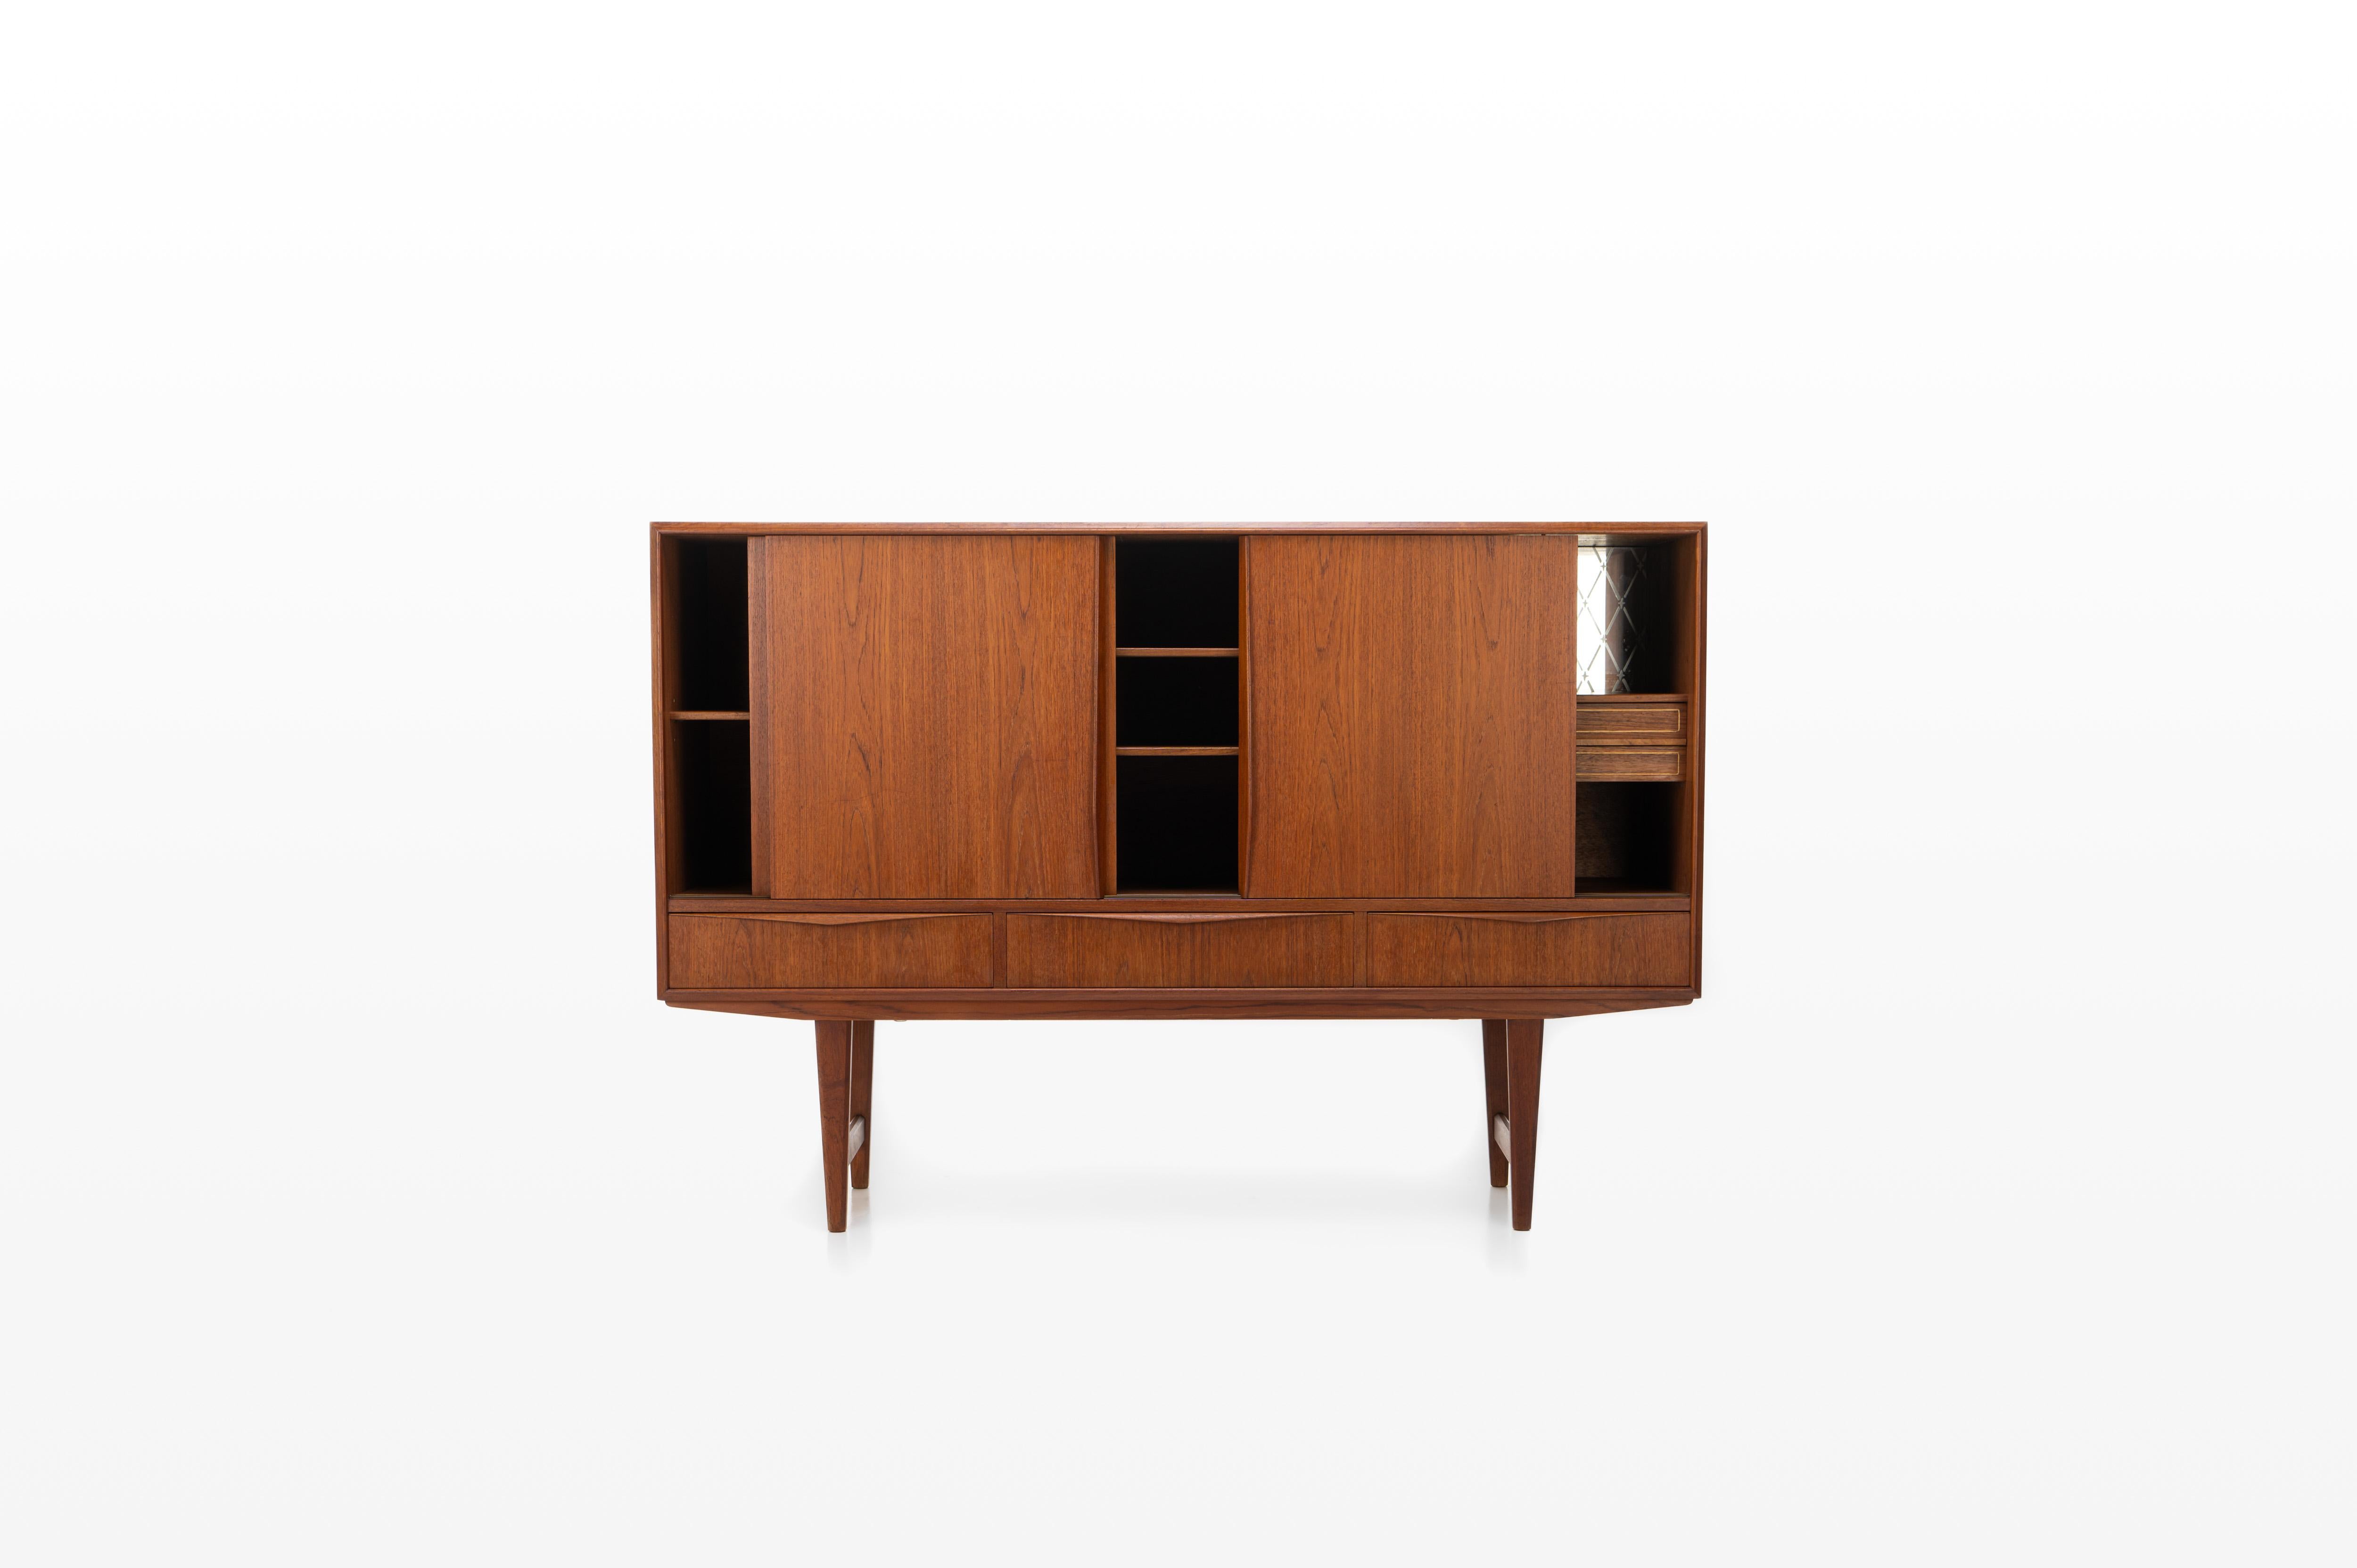 Beautiful Danish sideboard in teak designed by EW Bach for Sejling Skabe in the 60s. There are three sliding doors, lots of storage space and a bar area.